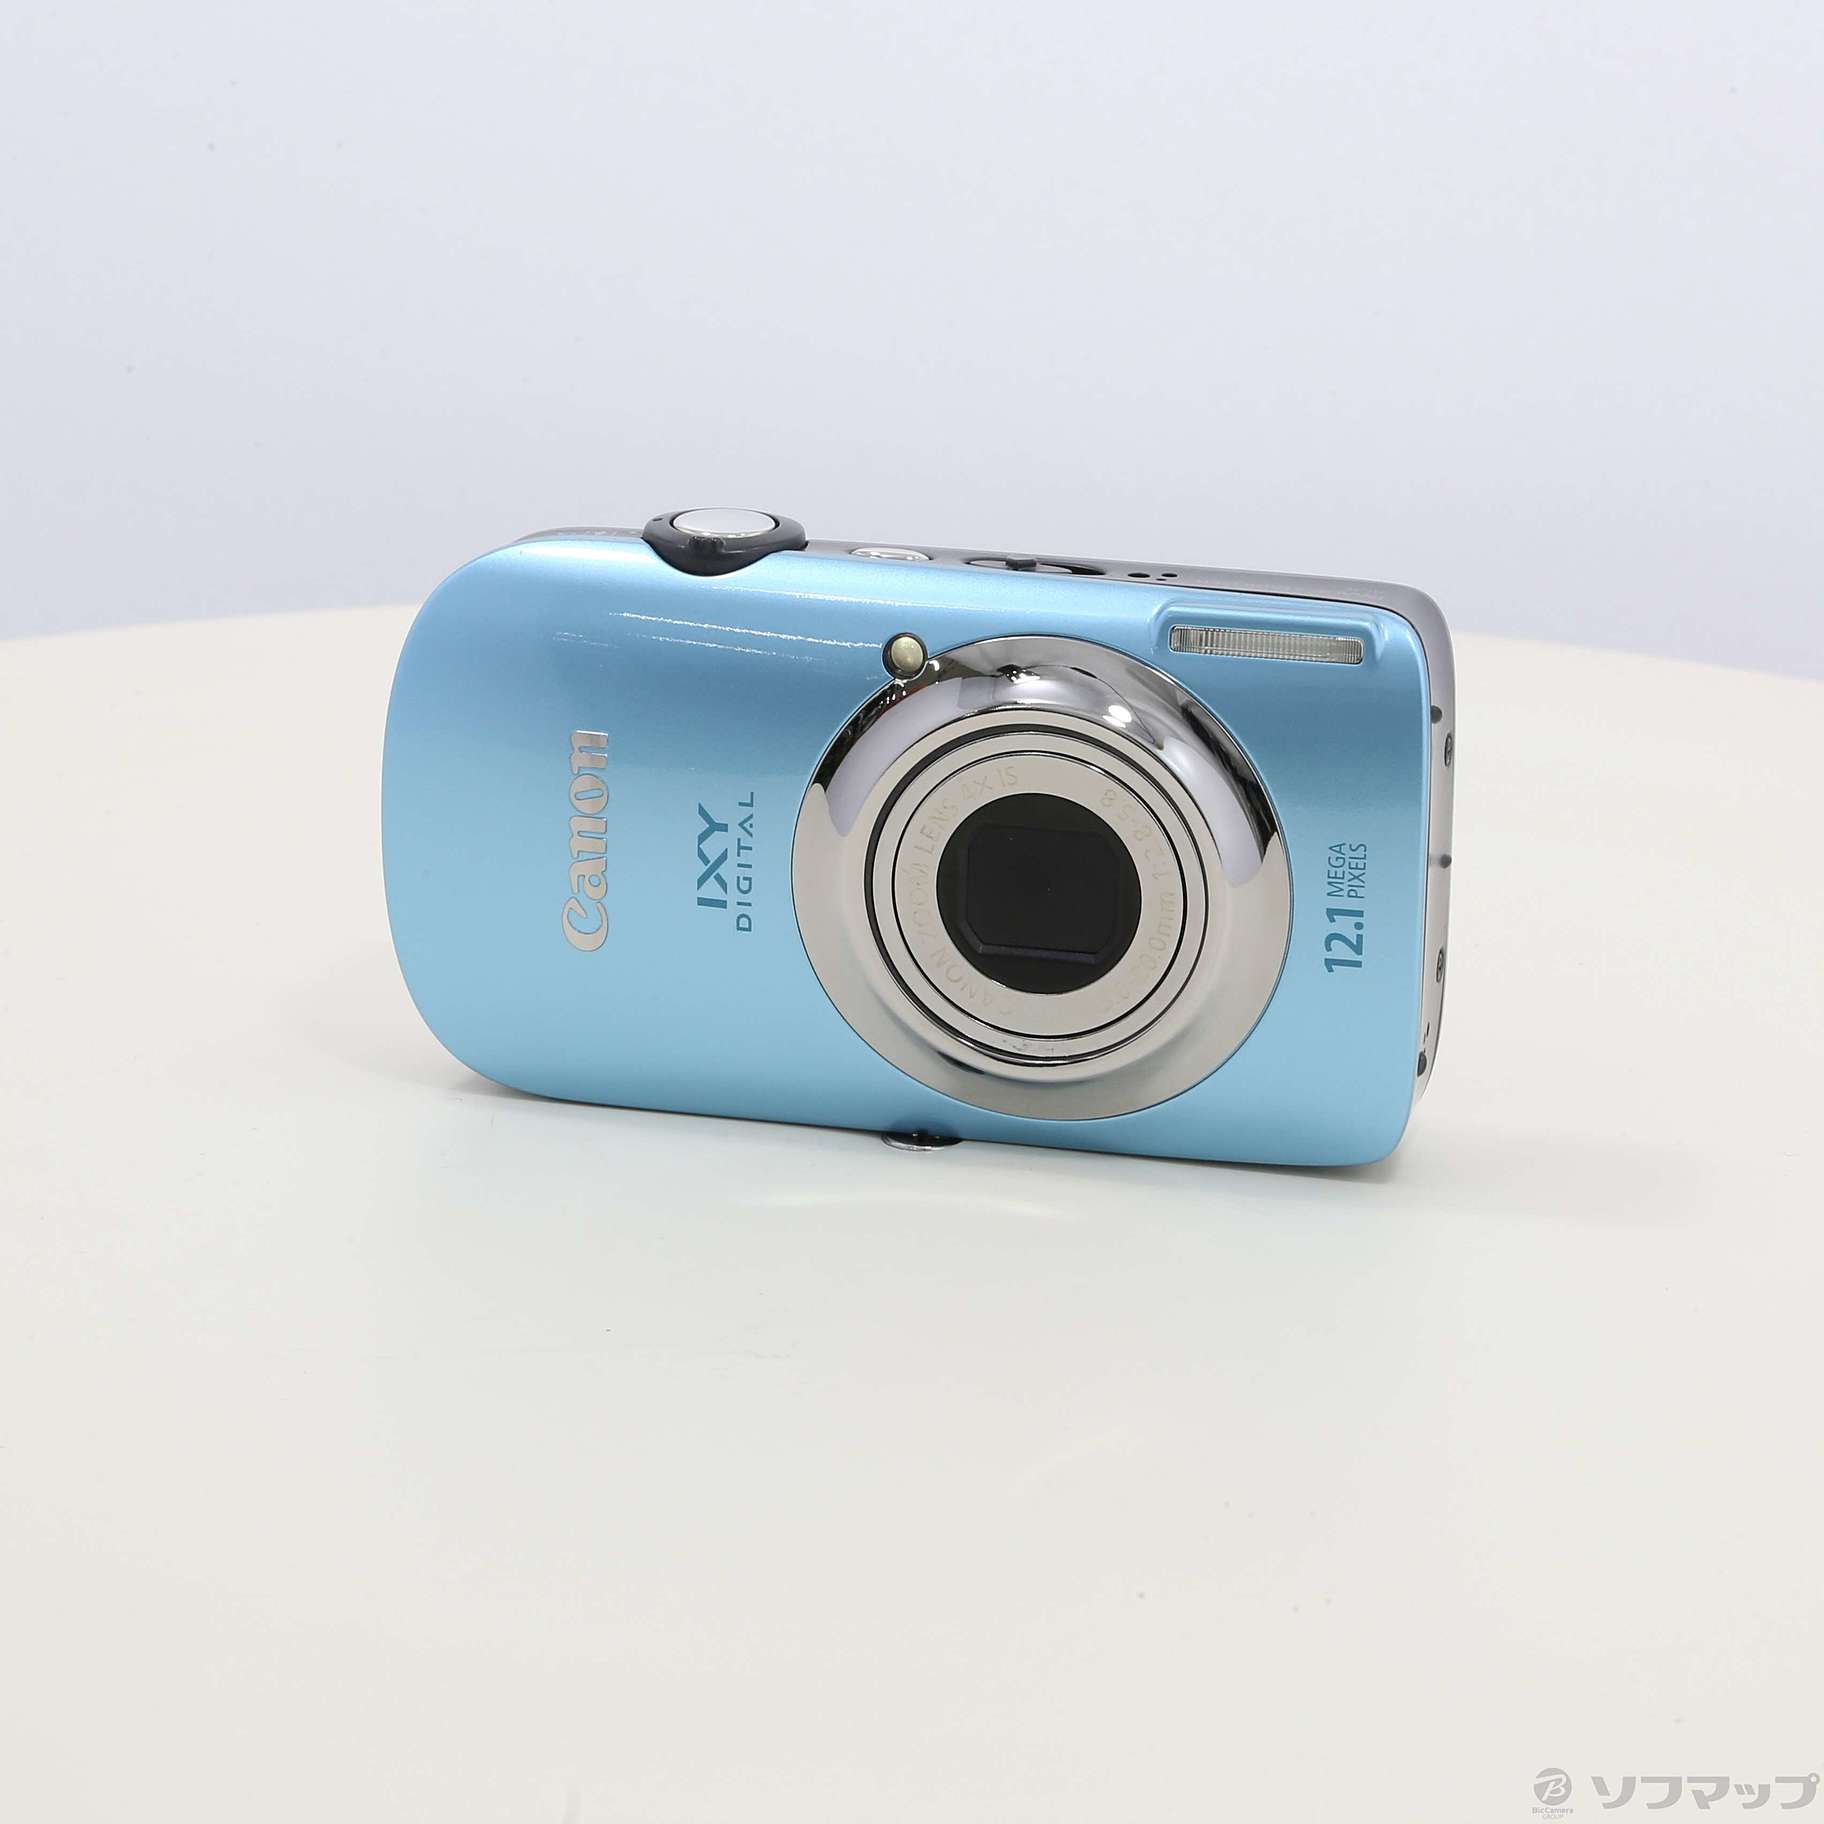 Canon IXY 510 IS ブルー手ぶれ補正レンズシフト方式